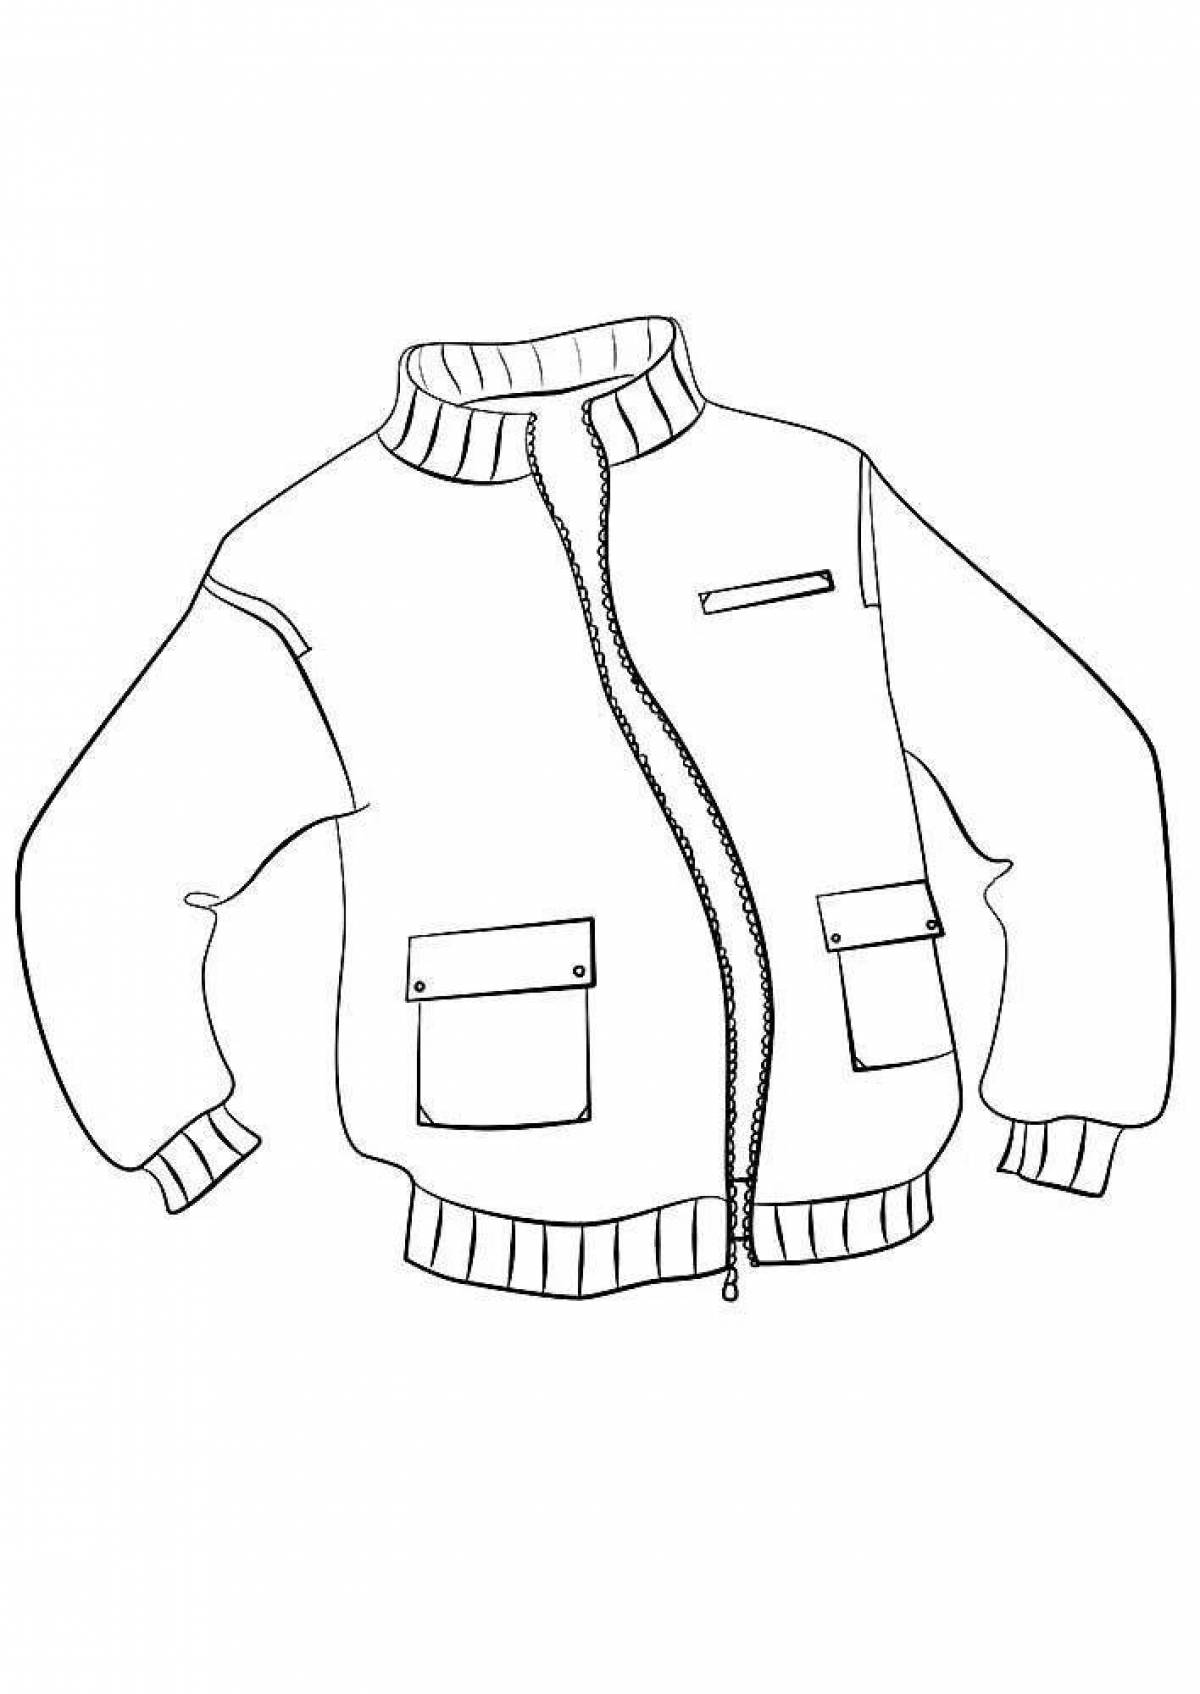 Fun jacket coloring for kids